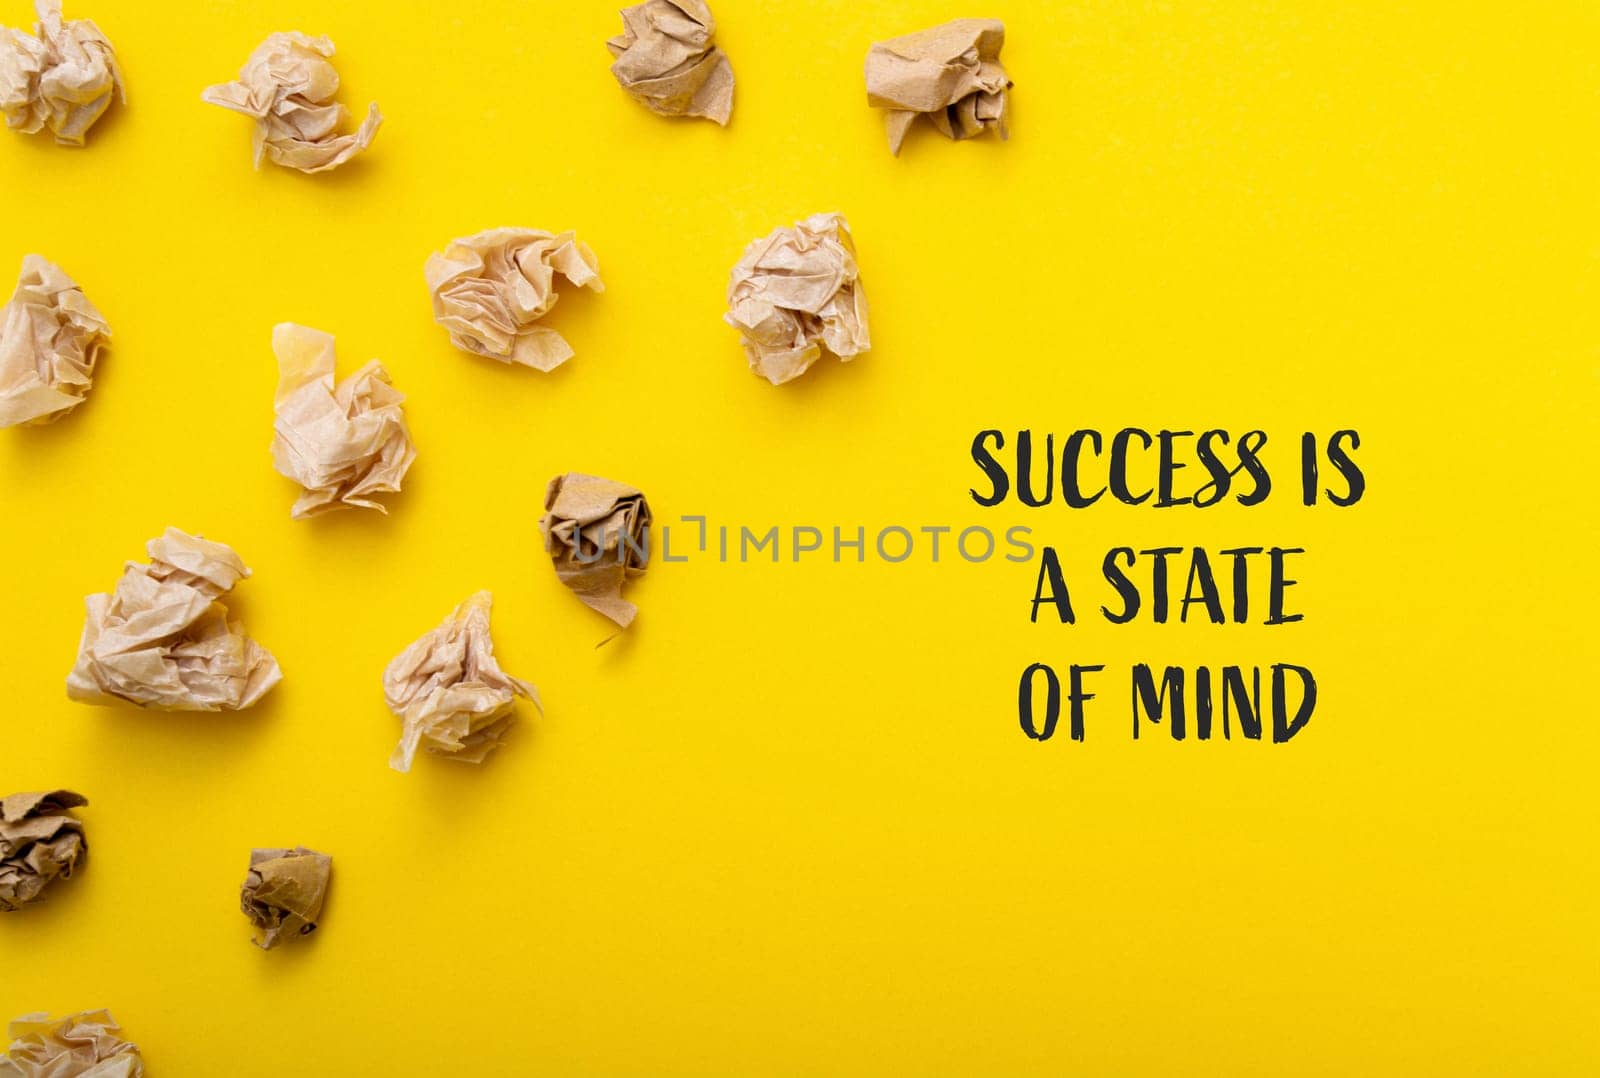 A motivational concept depicted with a yellow background and a cluster of crumpled paper spread across it.